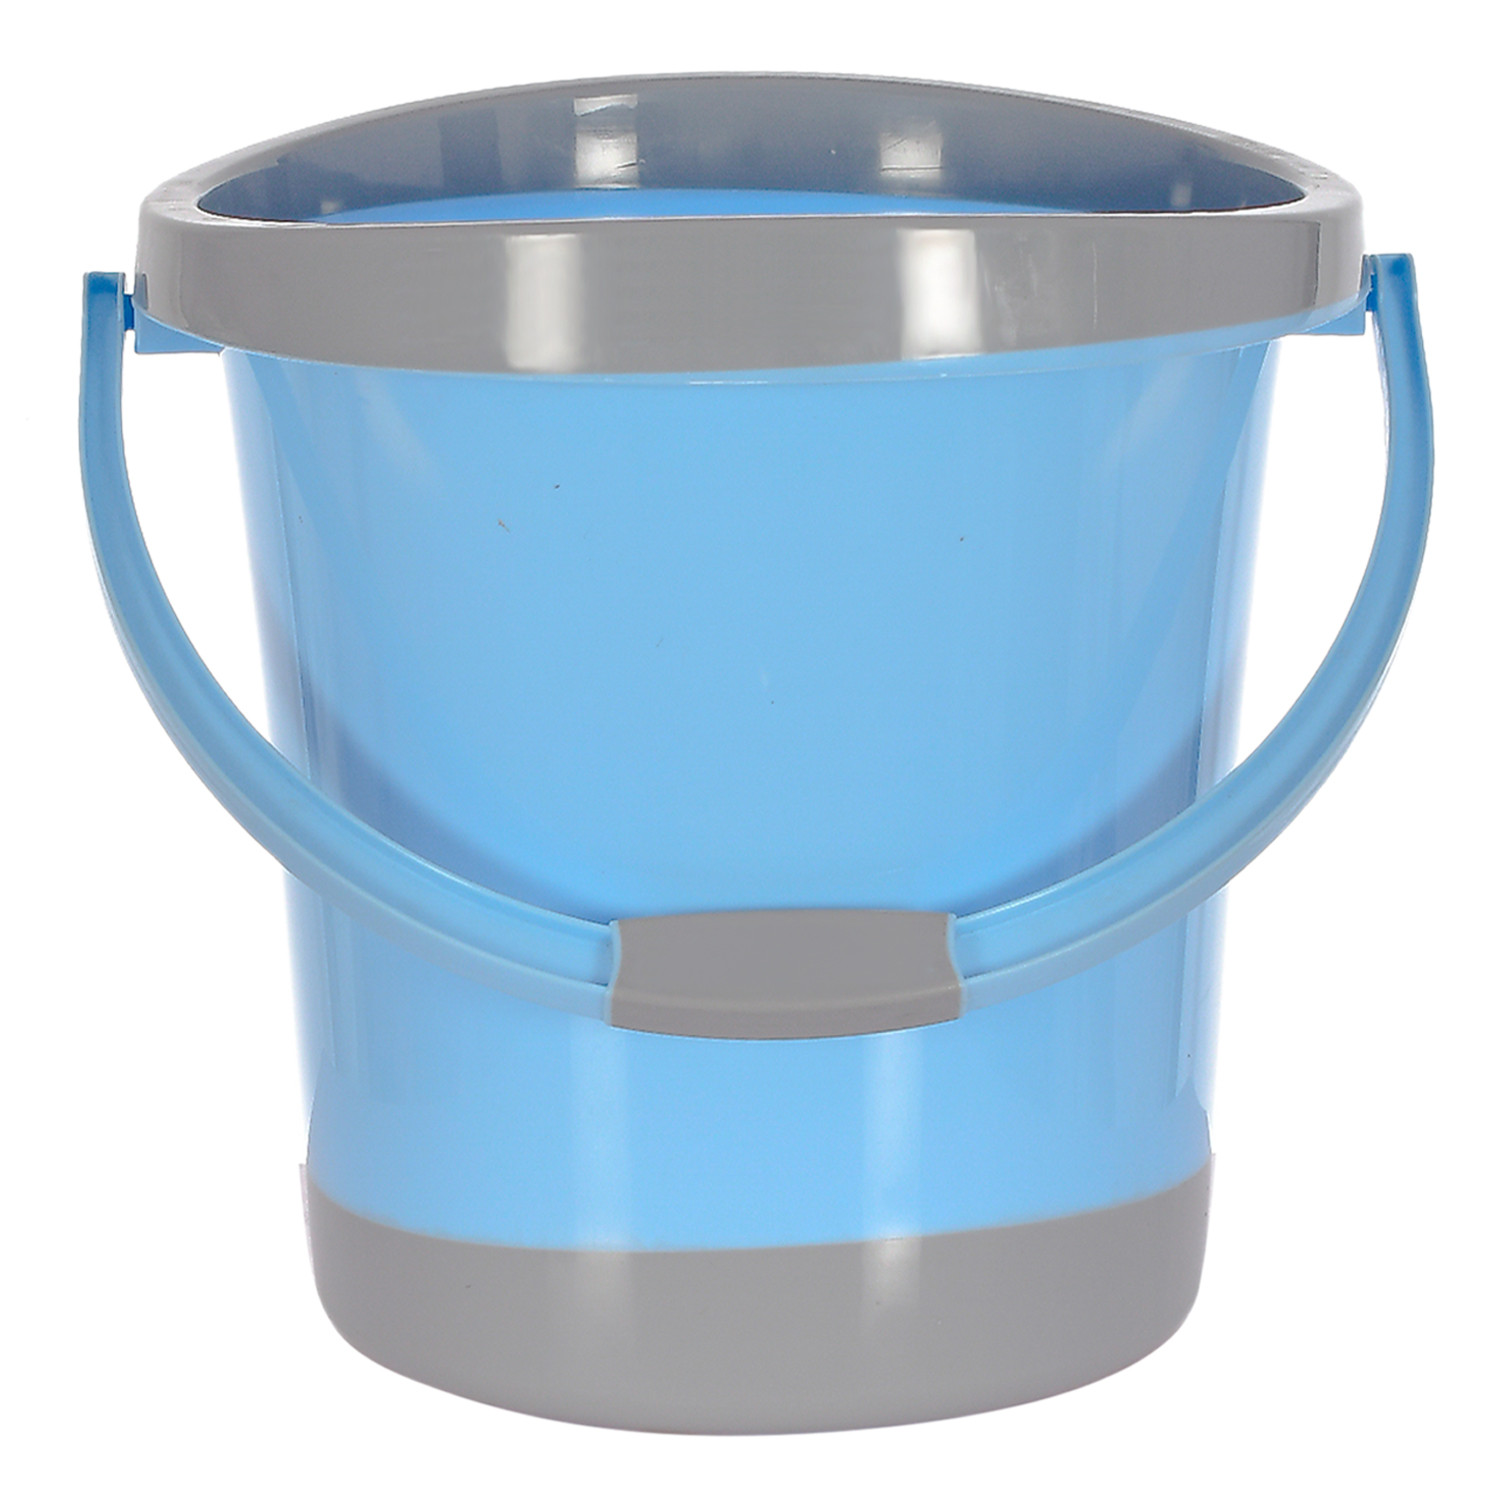 Kuber Industries Multiuses Plastic Bucket With Handle, 18 litre (Blue)-46KM0357